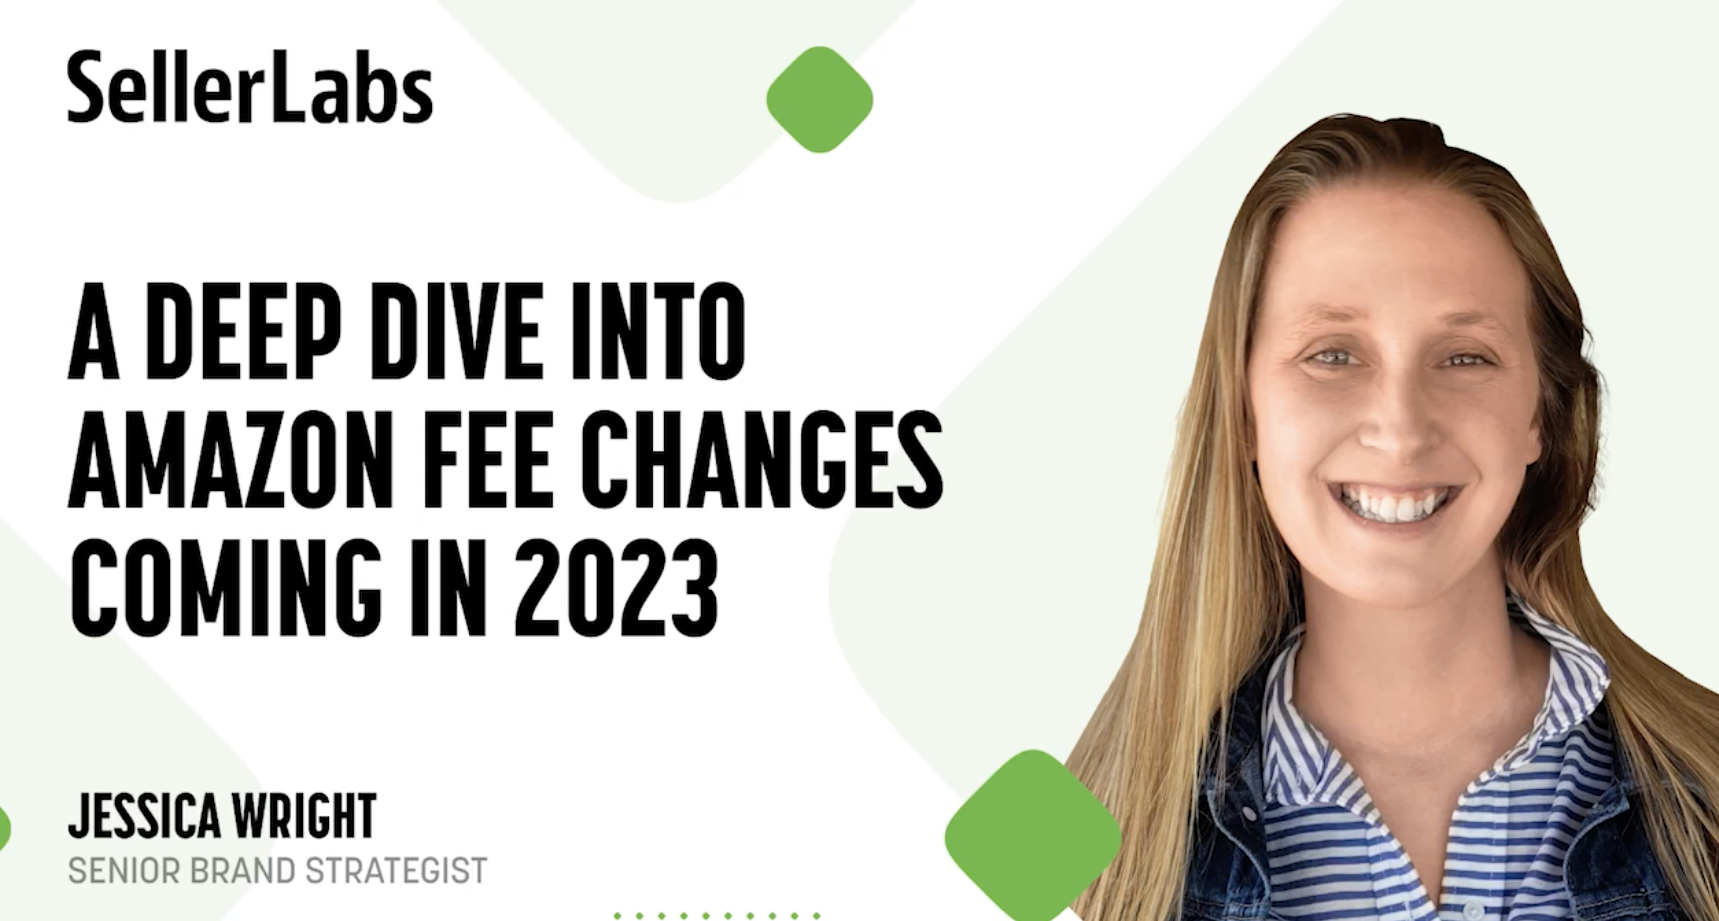 Amazon fee changes in 2023